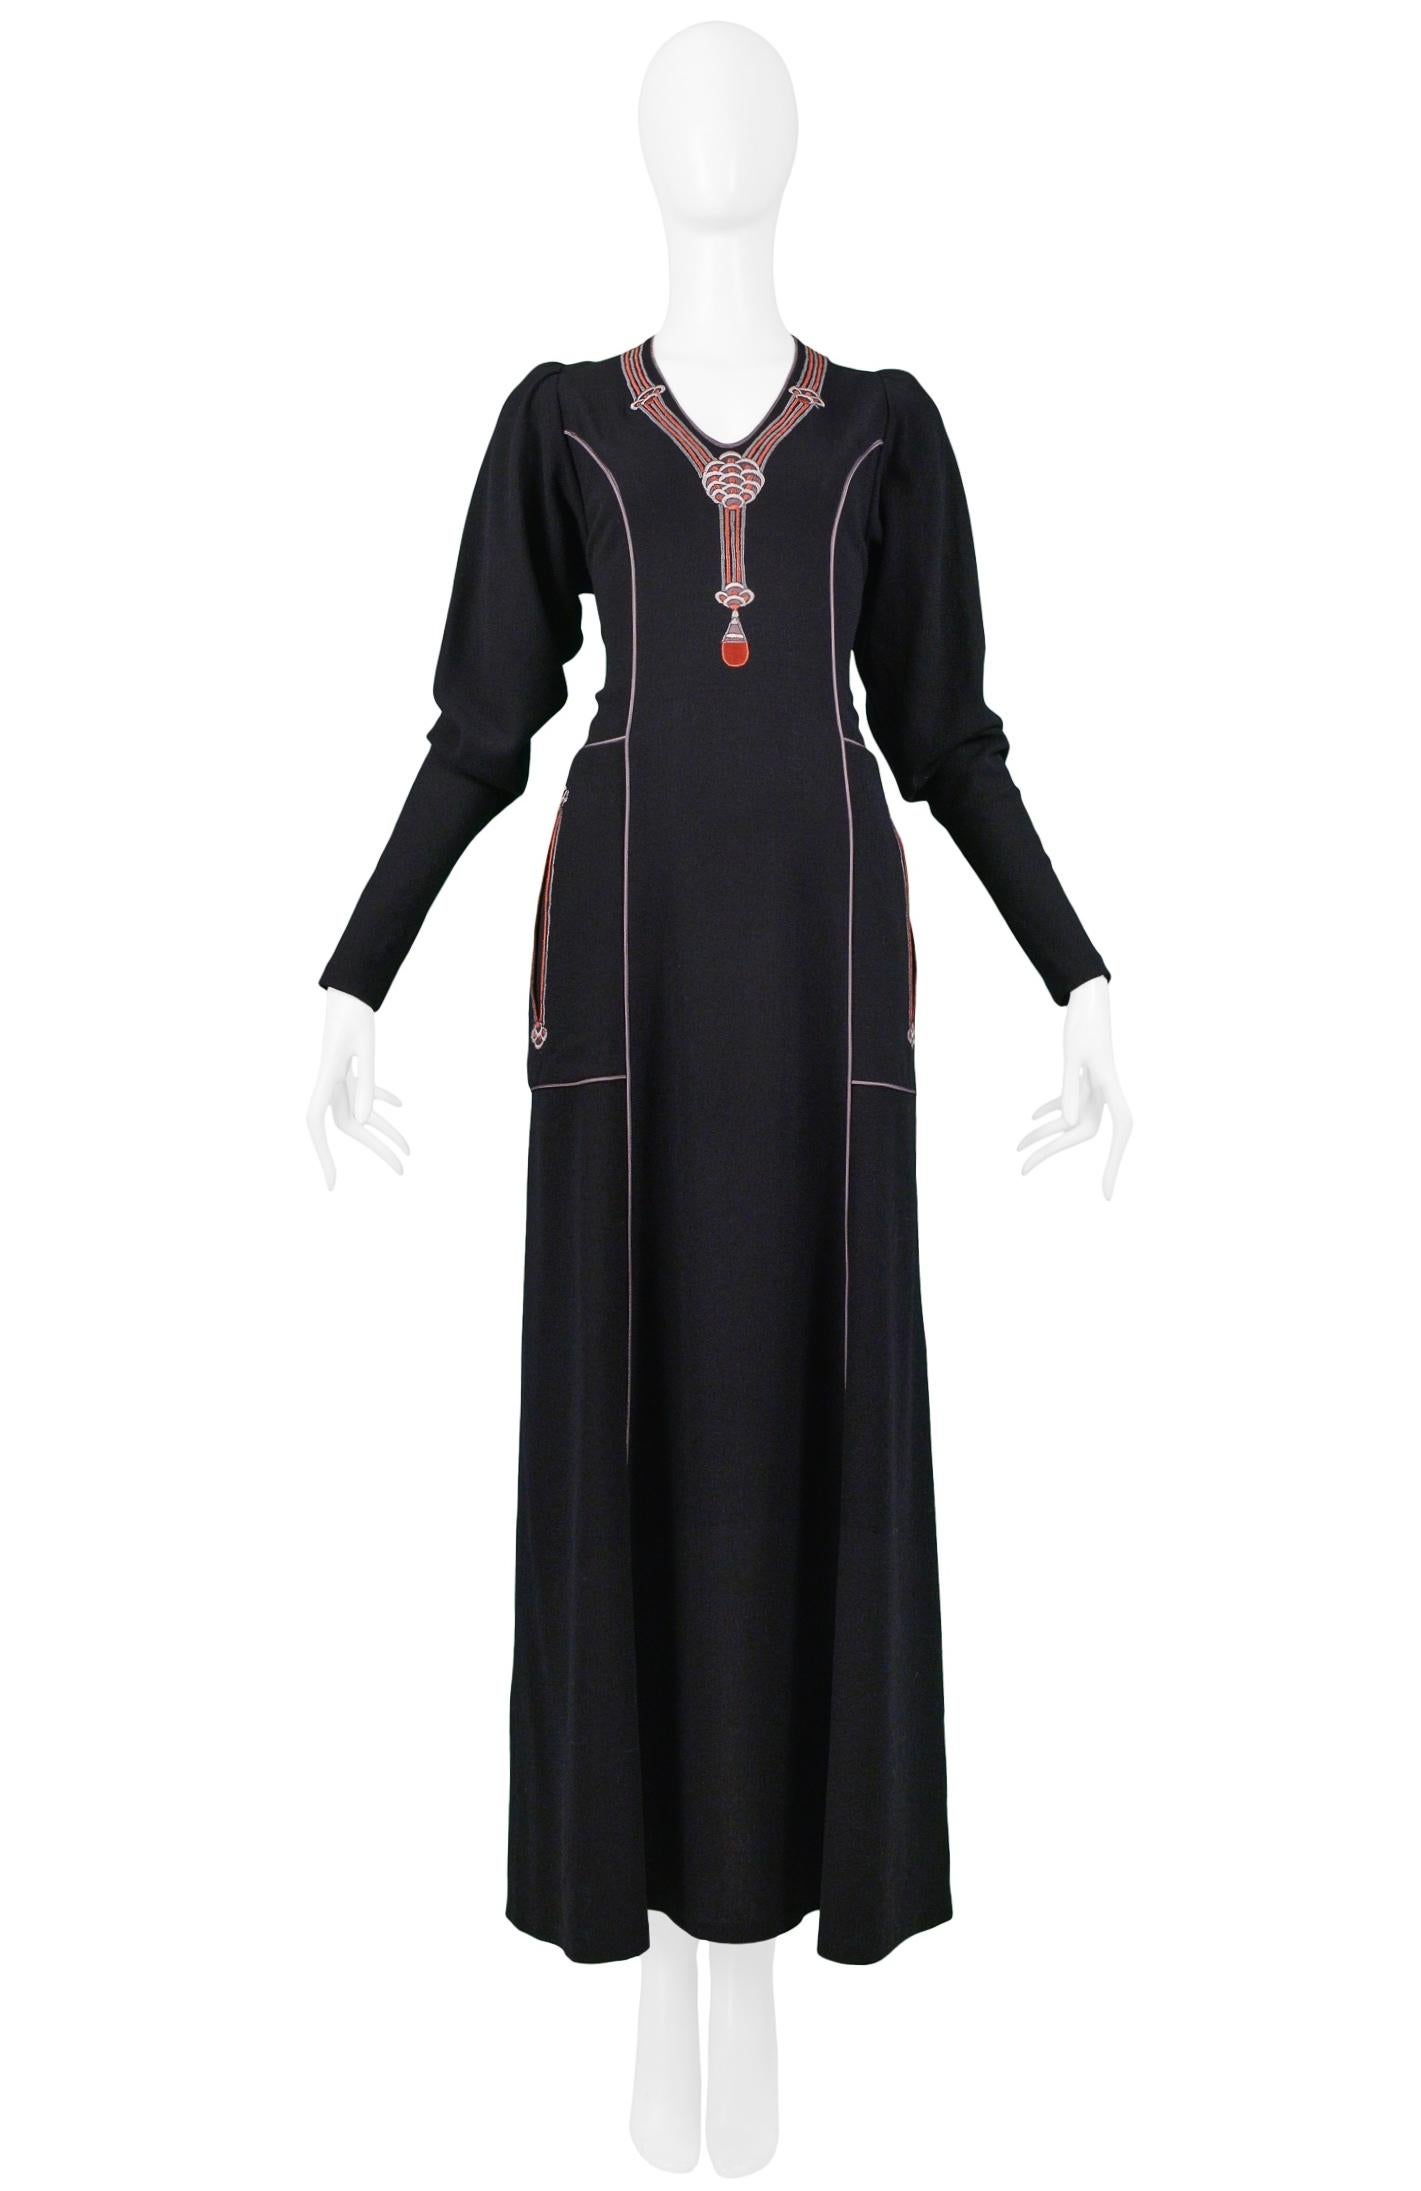 Vintage Janice Wainwright Art Deco-inspired black wool long sleeve maxi dress featuring an embroidered pendant necklace at the neckline, front slit pockets, and cord detailing at the seams. Center back zipper closure. Circa 1970s.

Good Vintage